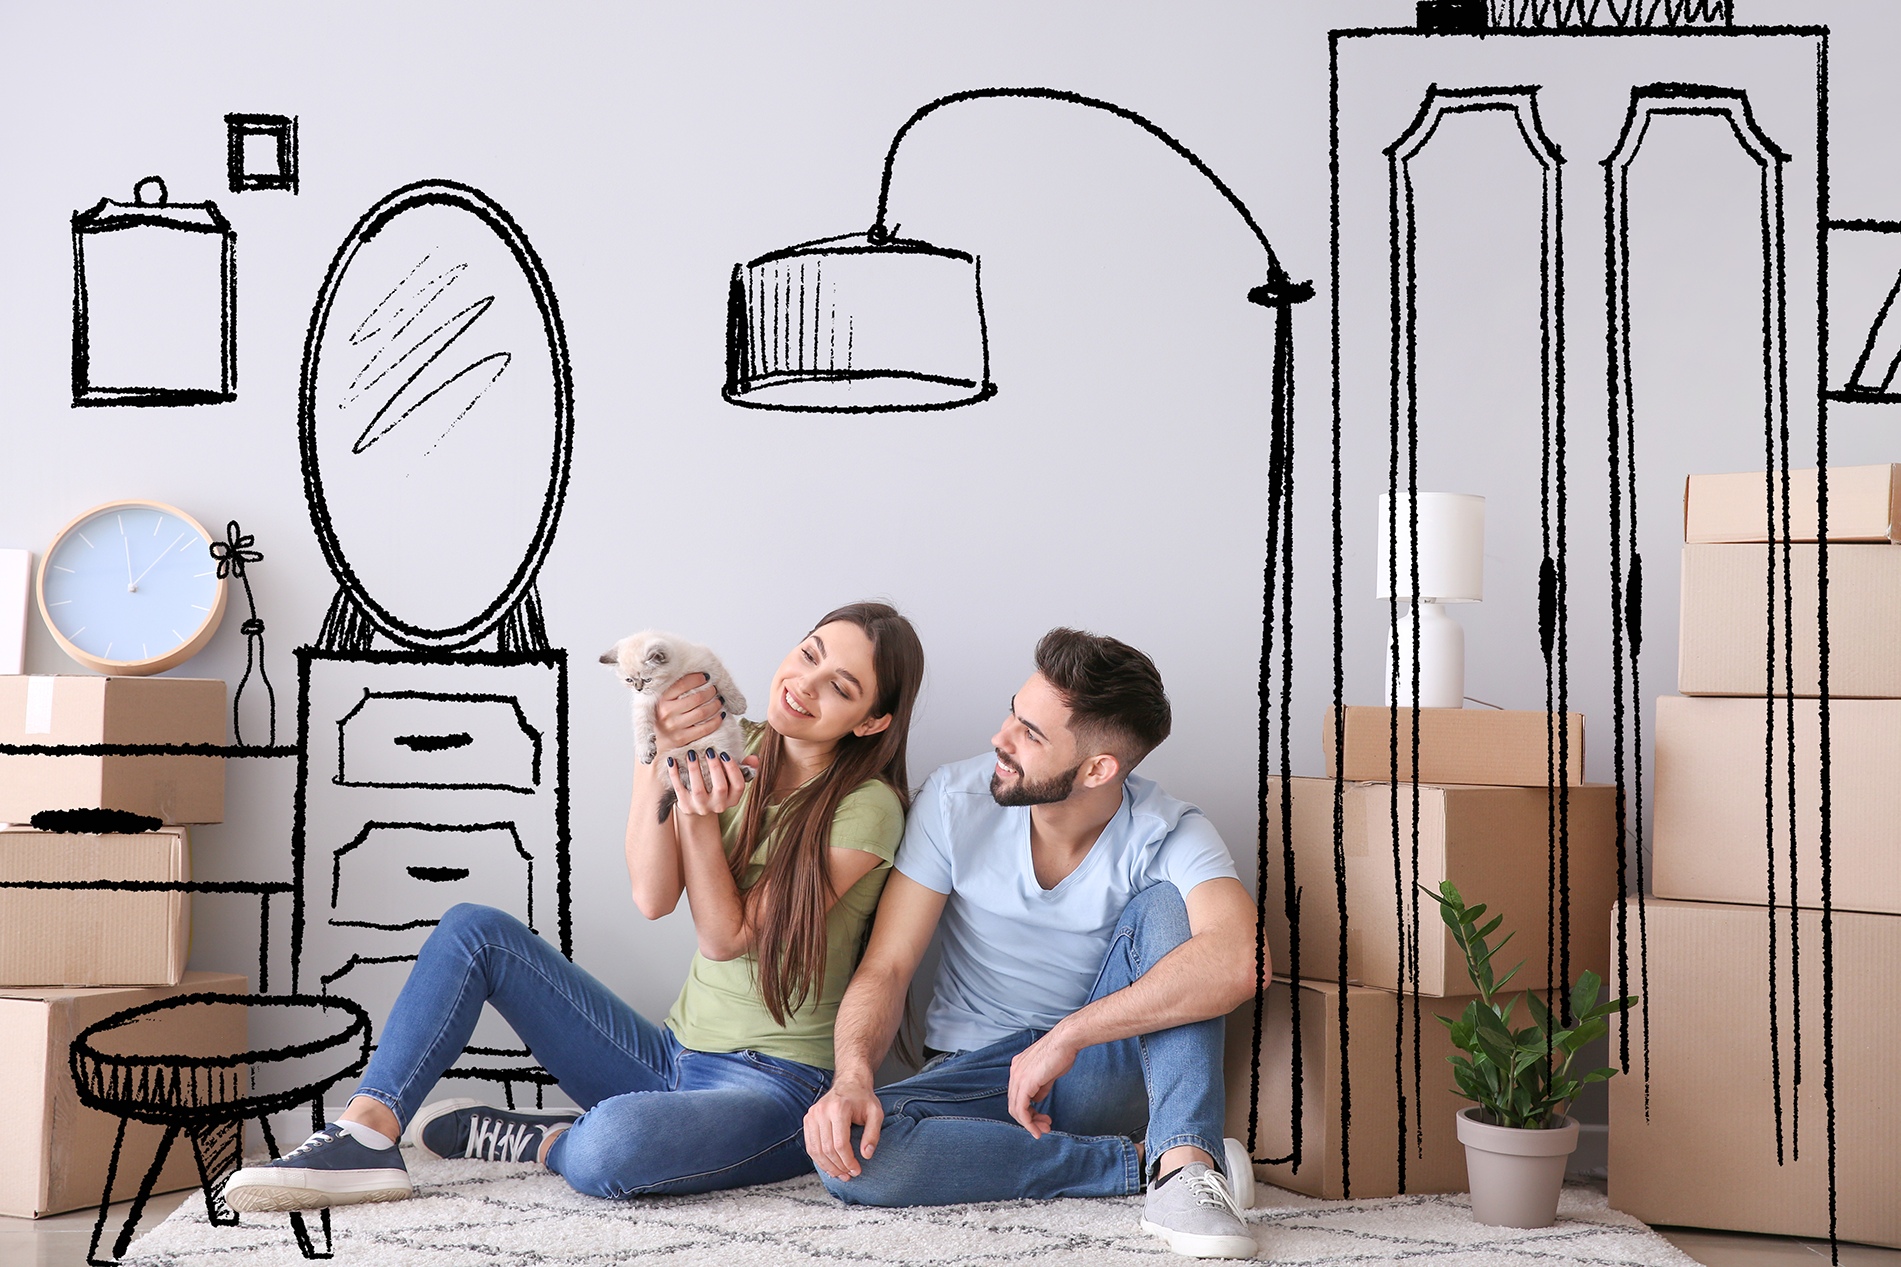 Couple enjoying new home with drawn furniture behind them